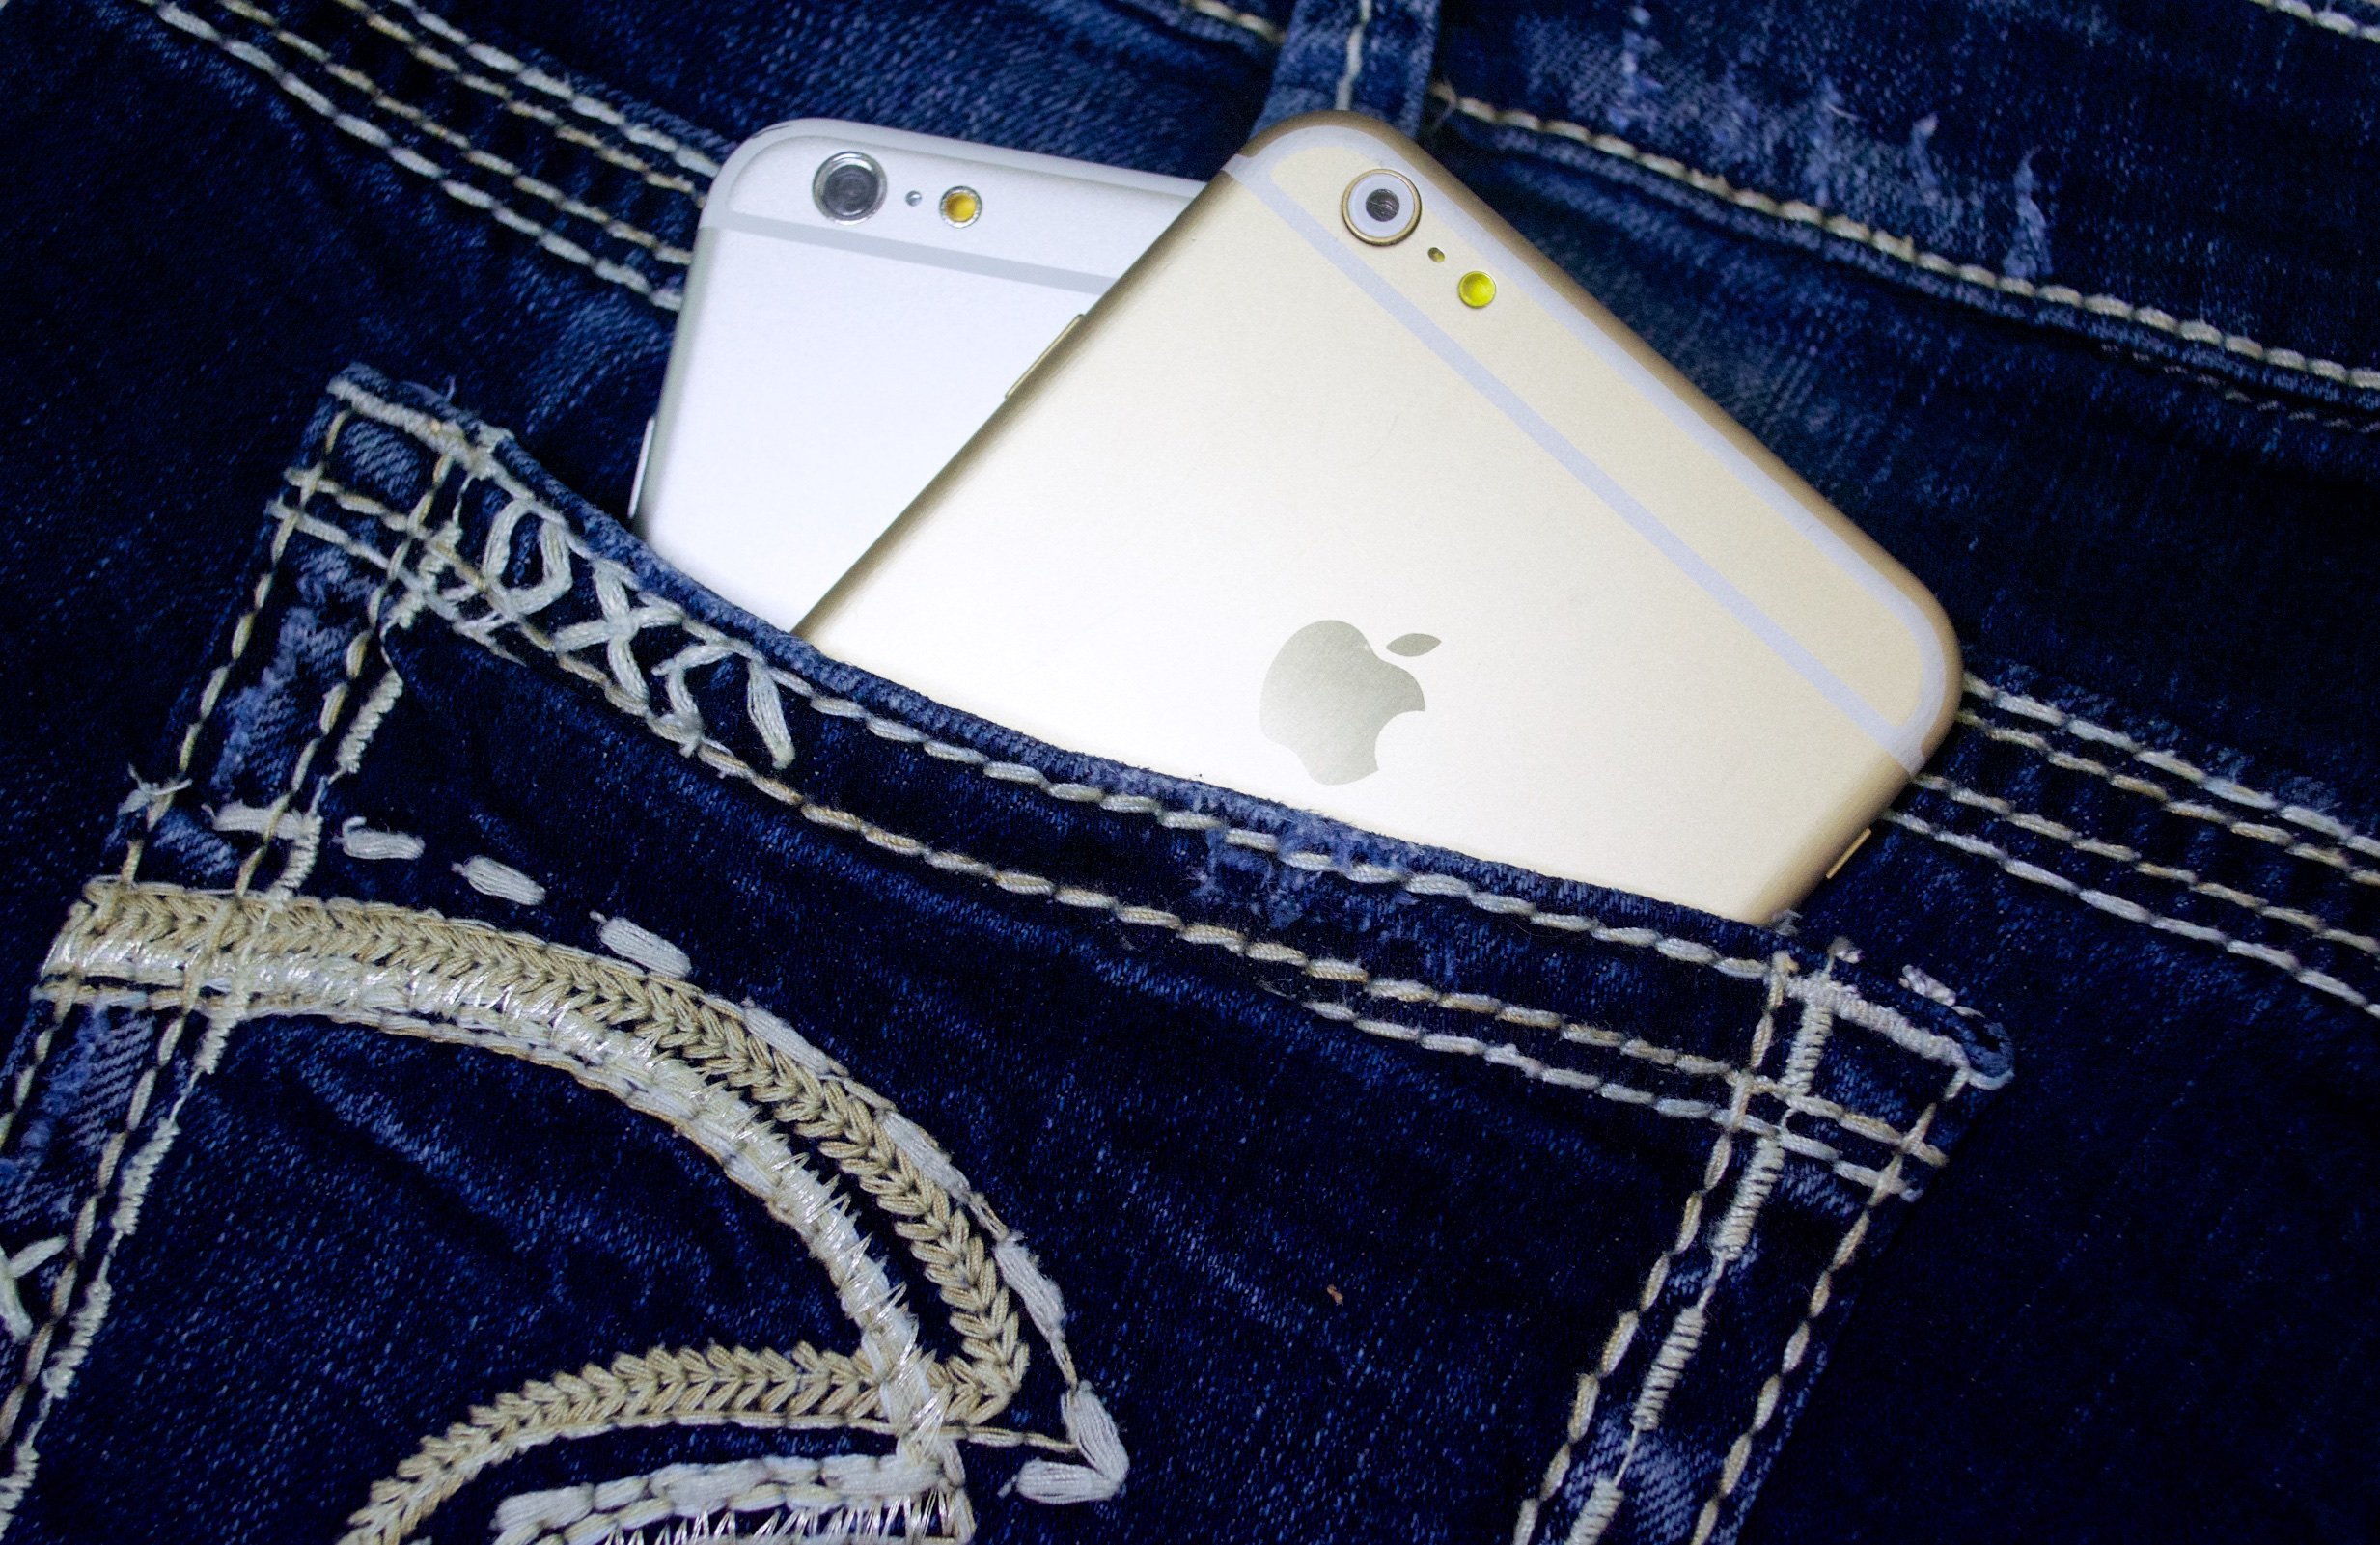 Here's how to see if the iPhone 6 or iPhone 6 is pocket friendly.